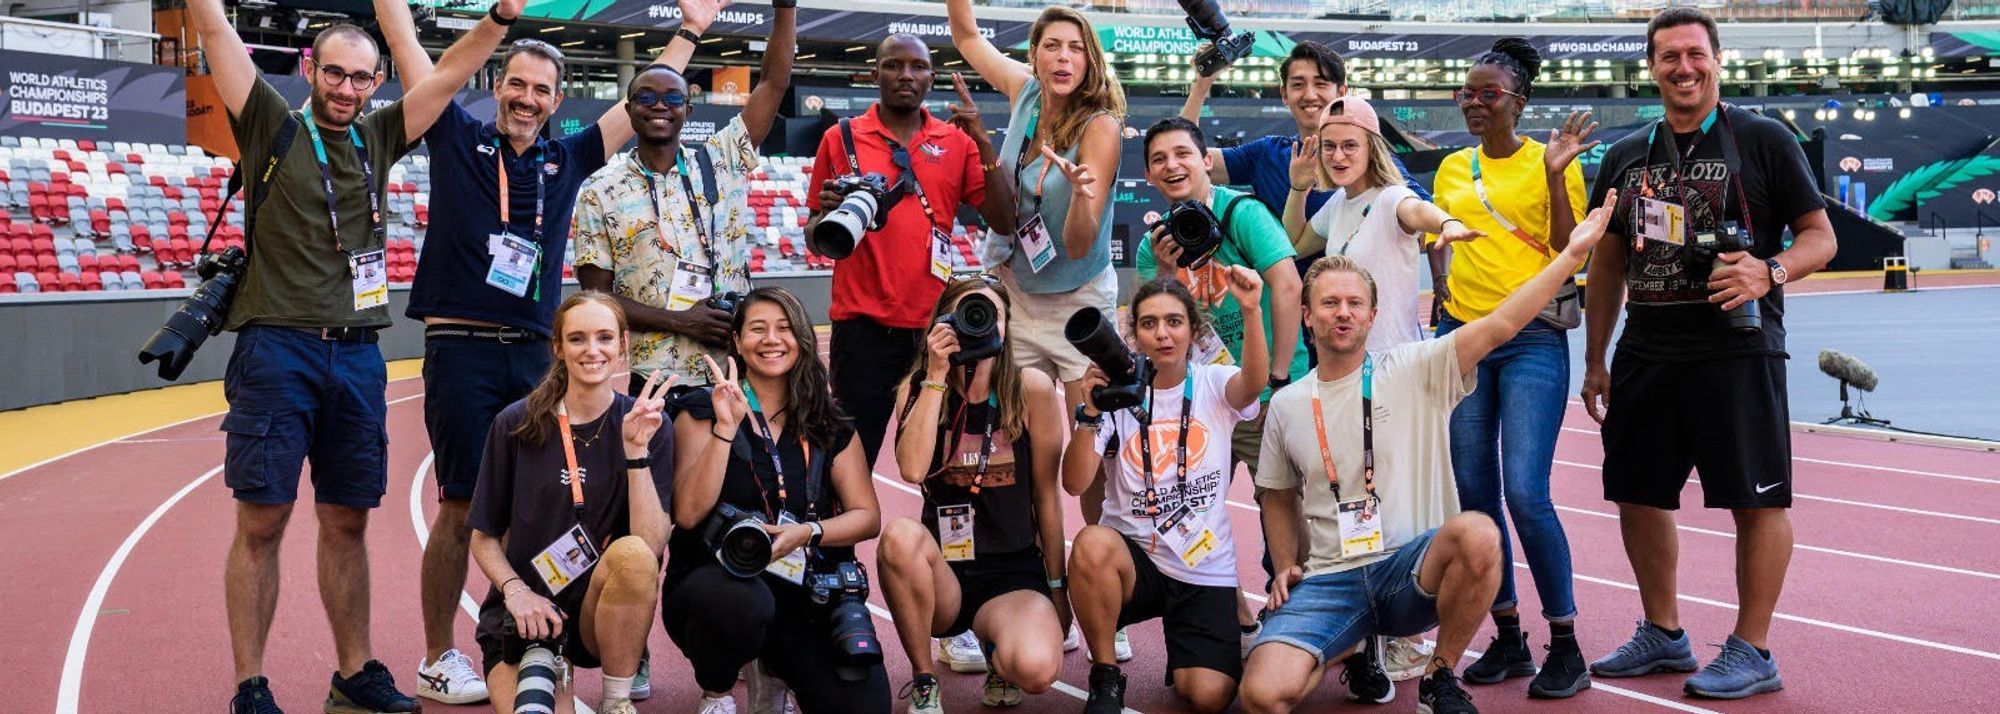 While the world’s best athletes were performing on track, 12 participants had the unique opportunity to capture them up close as part of the inaugural World Athletics Photography Workshop